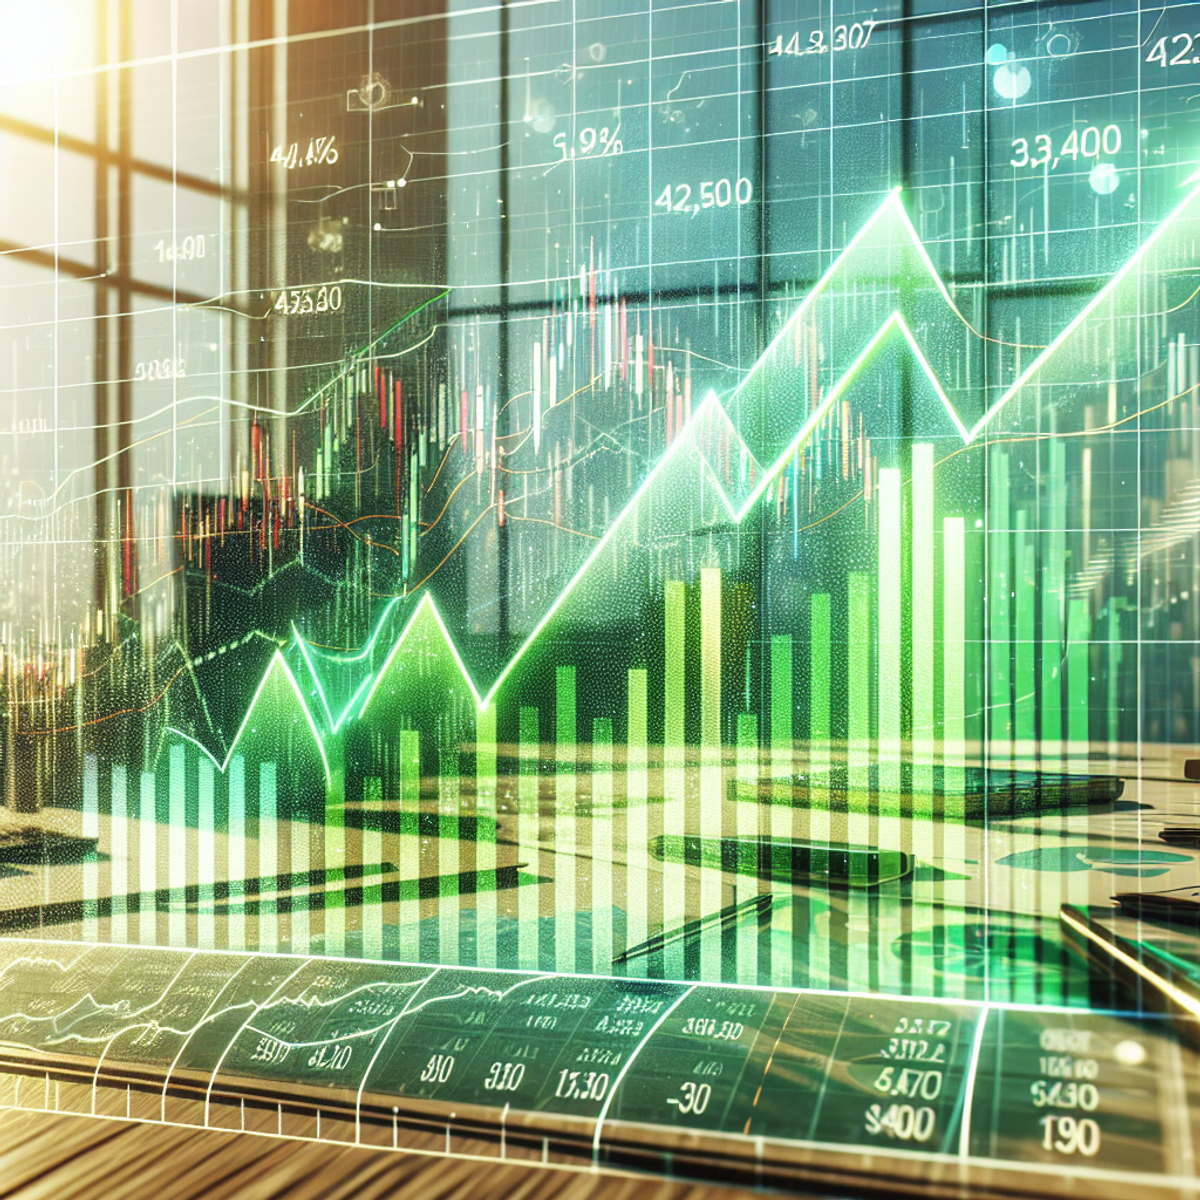 A stock market graph with an upward trend, vibrant green colors dominating, and a neat office setting with sunlight pouring in through a window.